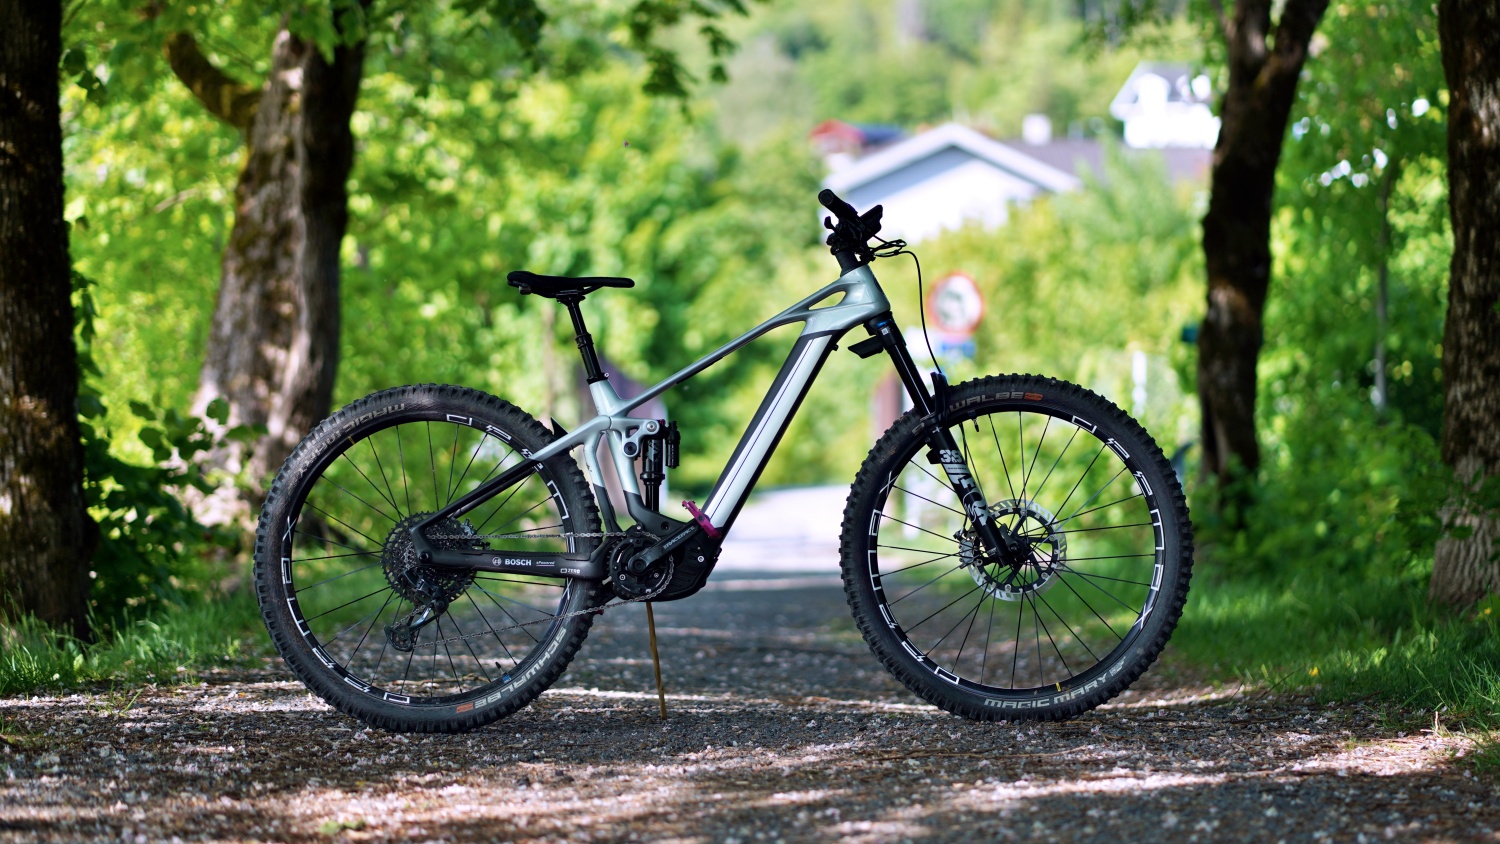 The Bosch Performance CX Race was tested on a Mondraker Crafty Carbon.